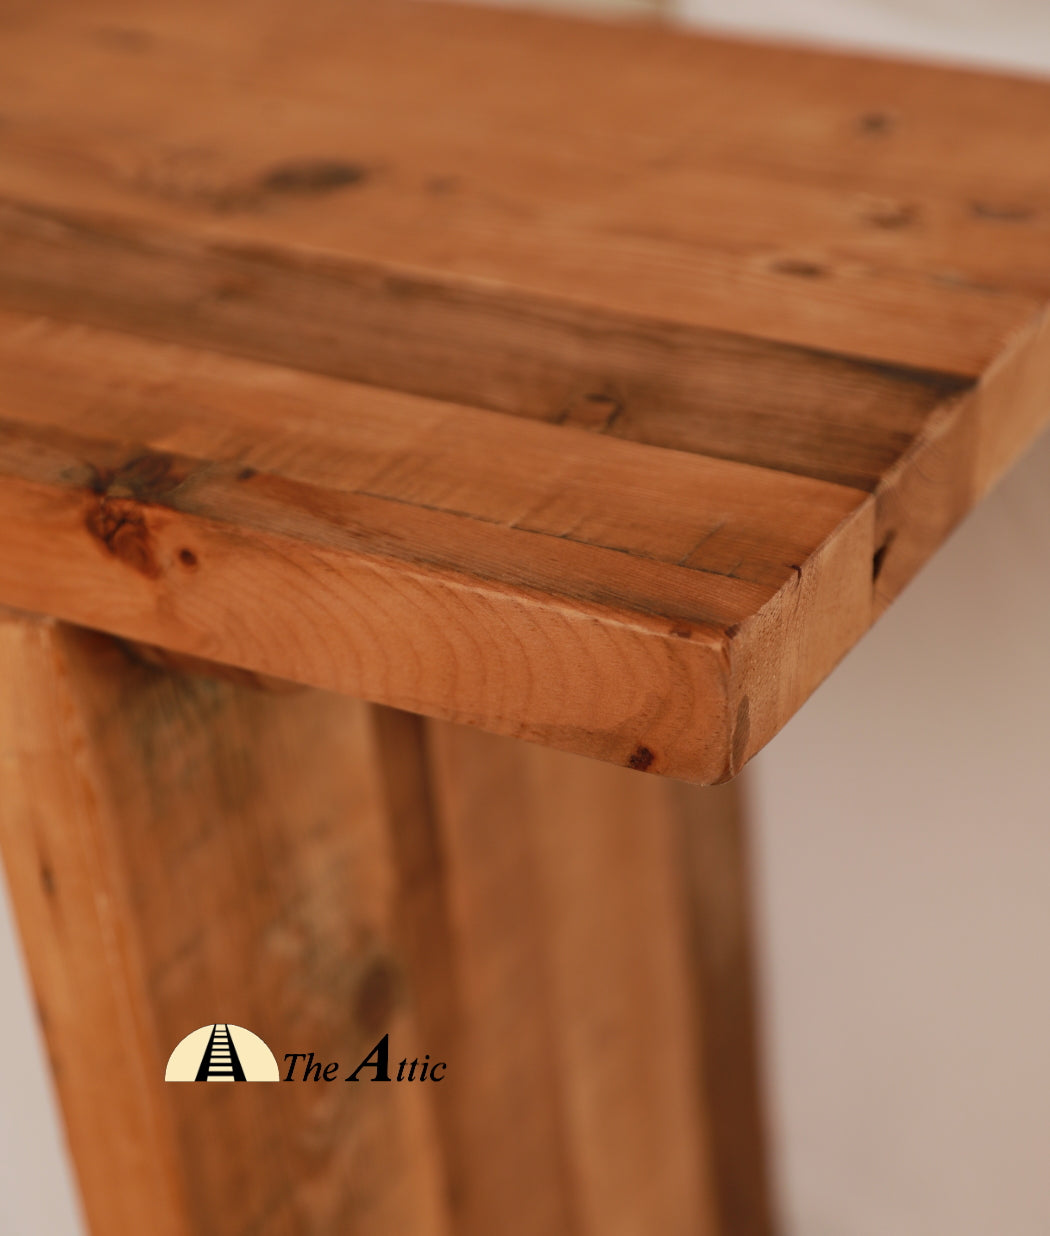 Dallas Recycled Old Pine Wood A-line Console, Accent Table - The Attic Dubai